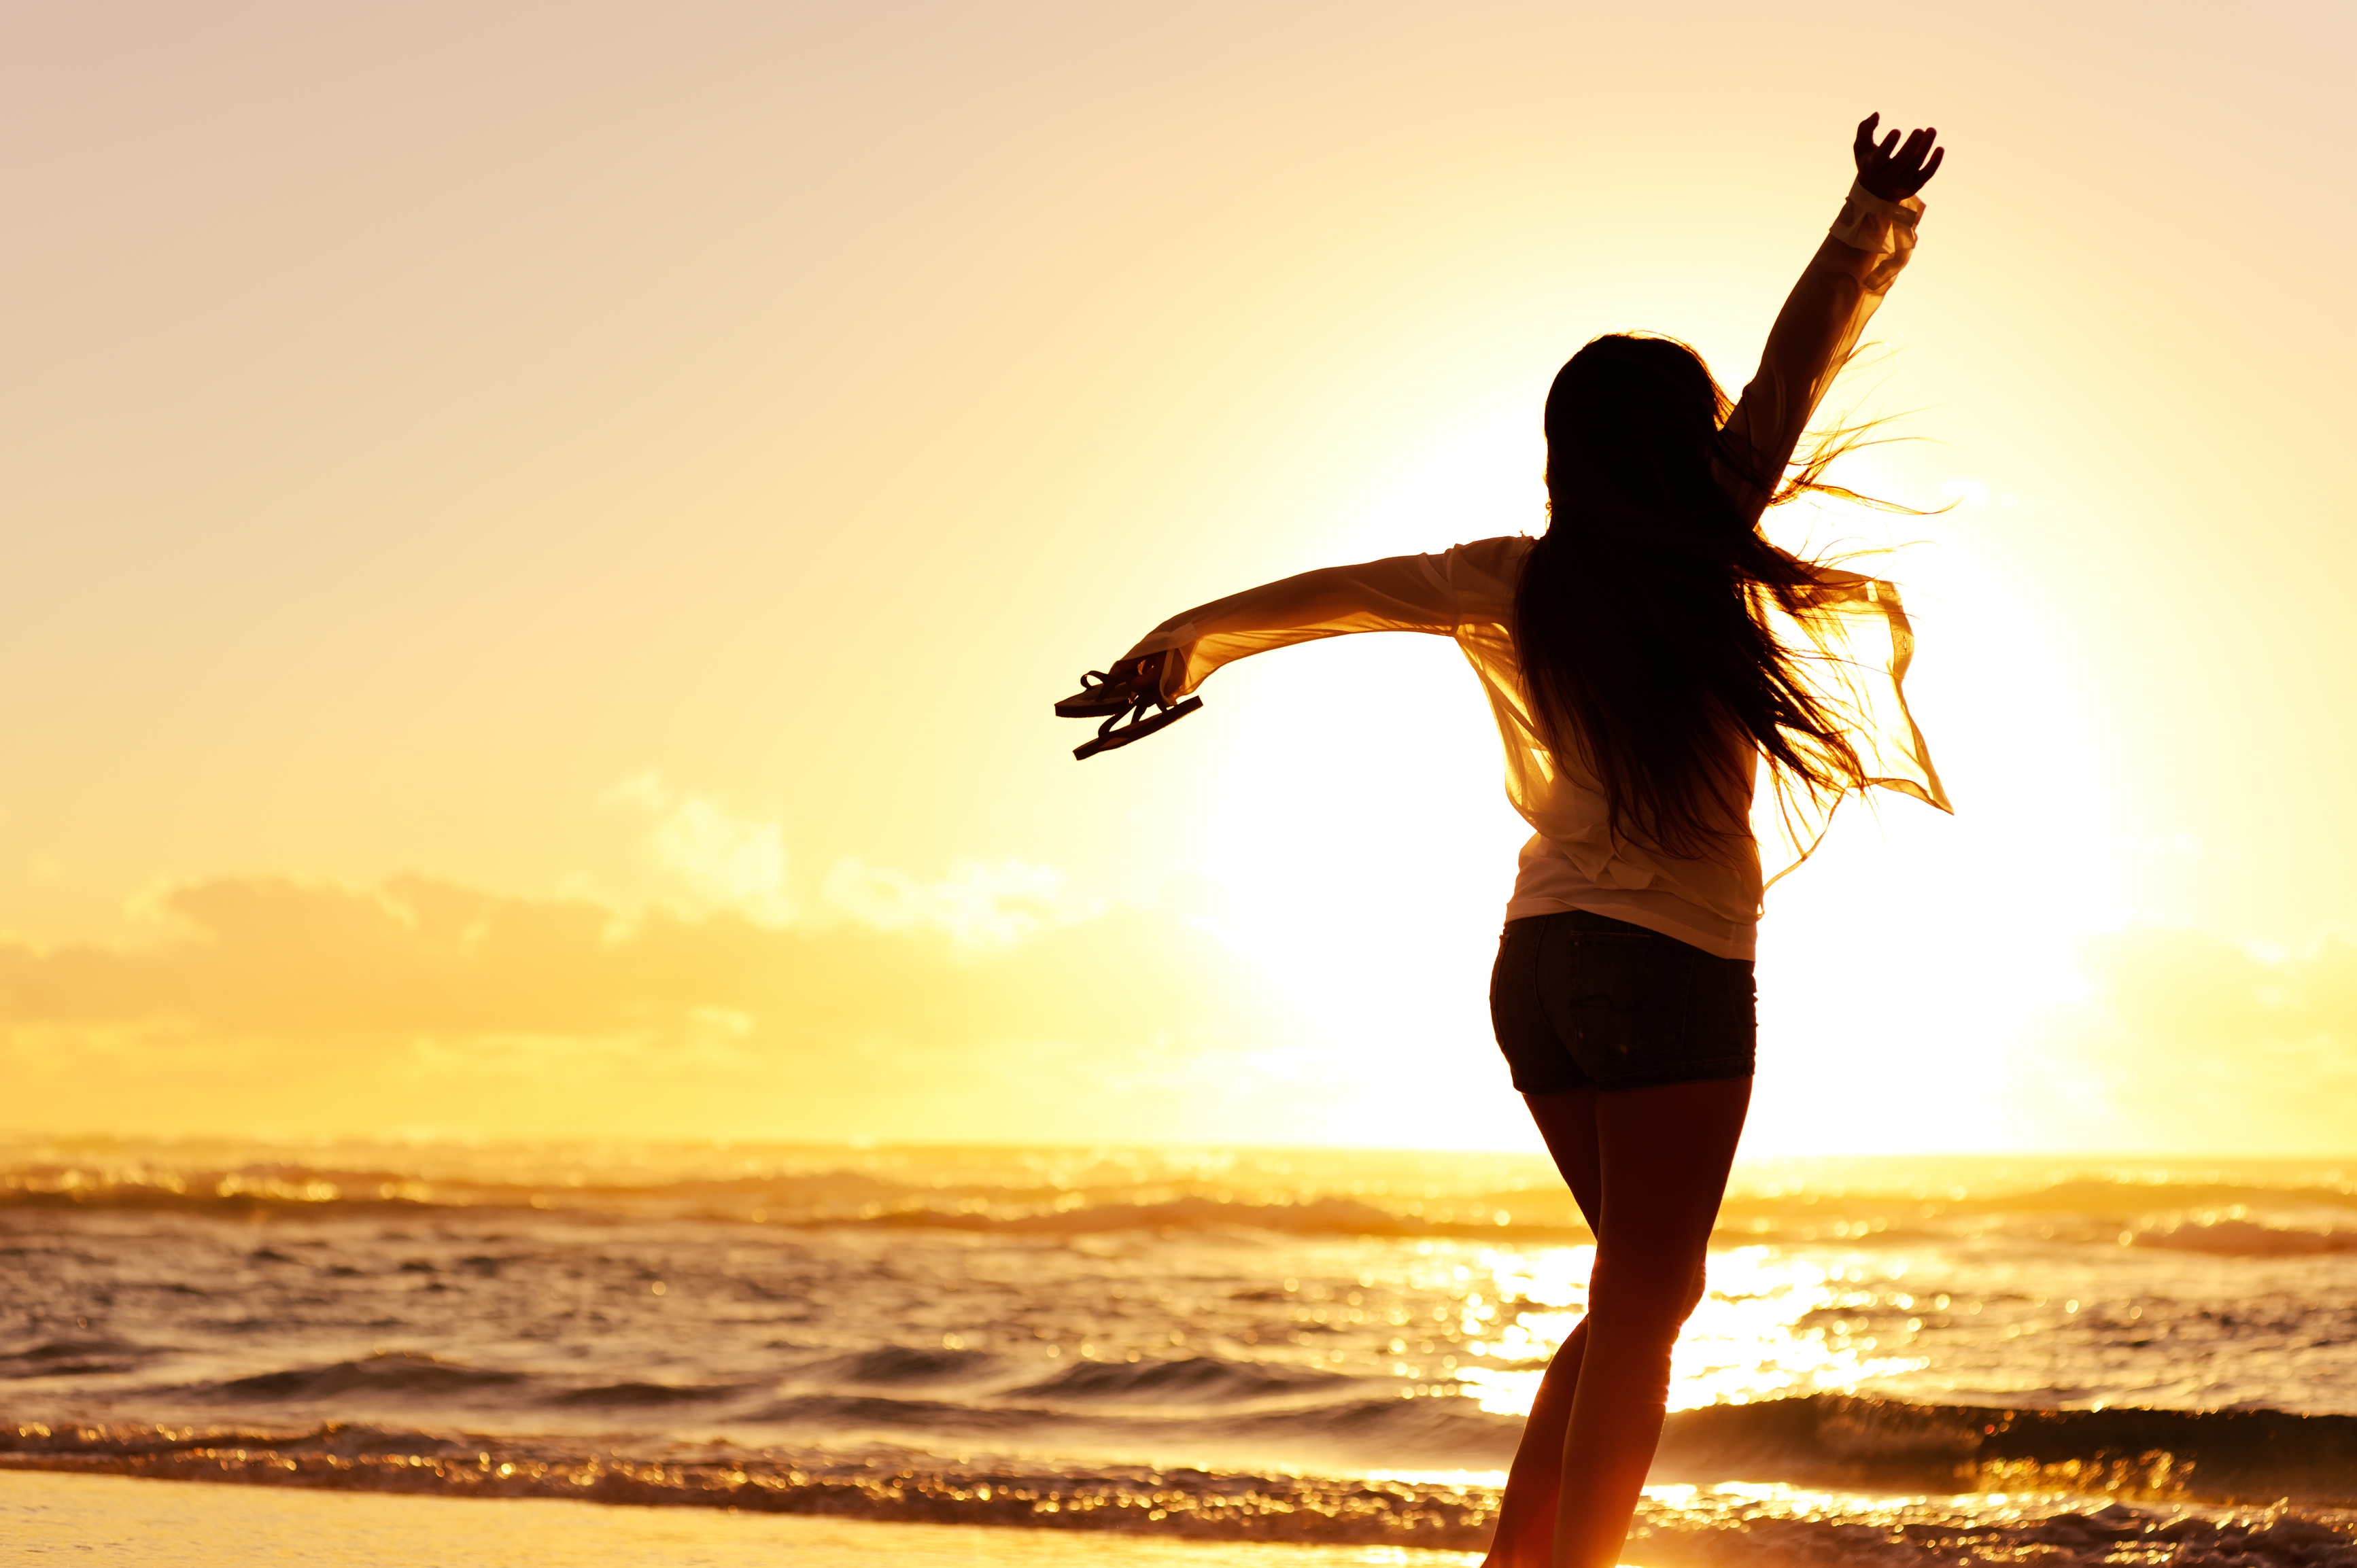 carefree woman dancing in the sunset on the beach. vacation vitality healthy living concept